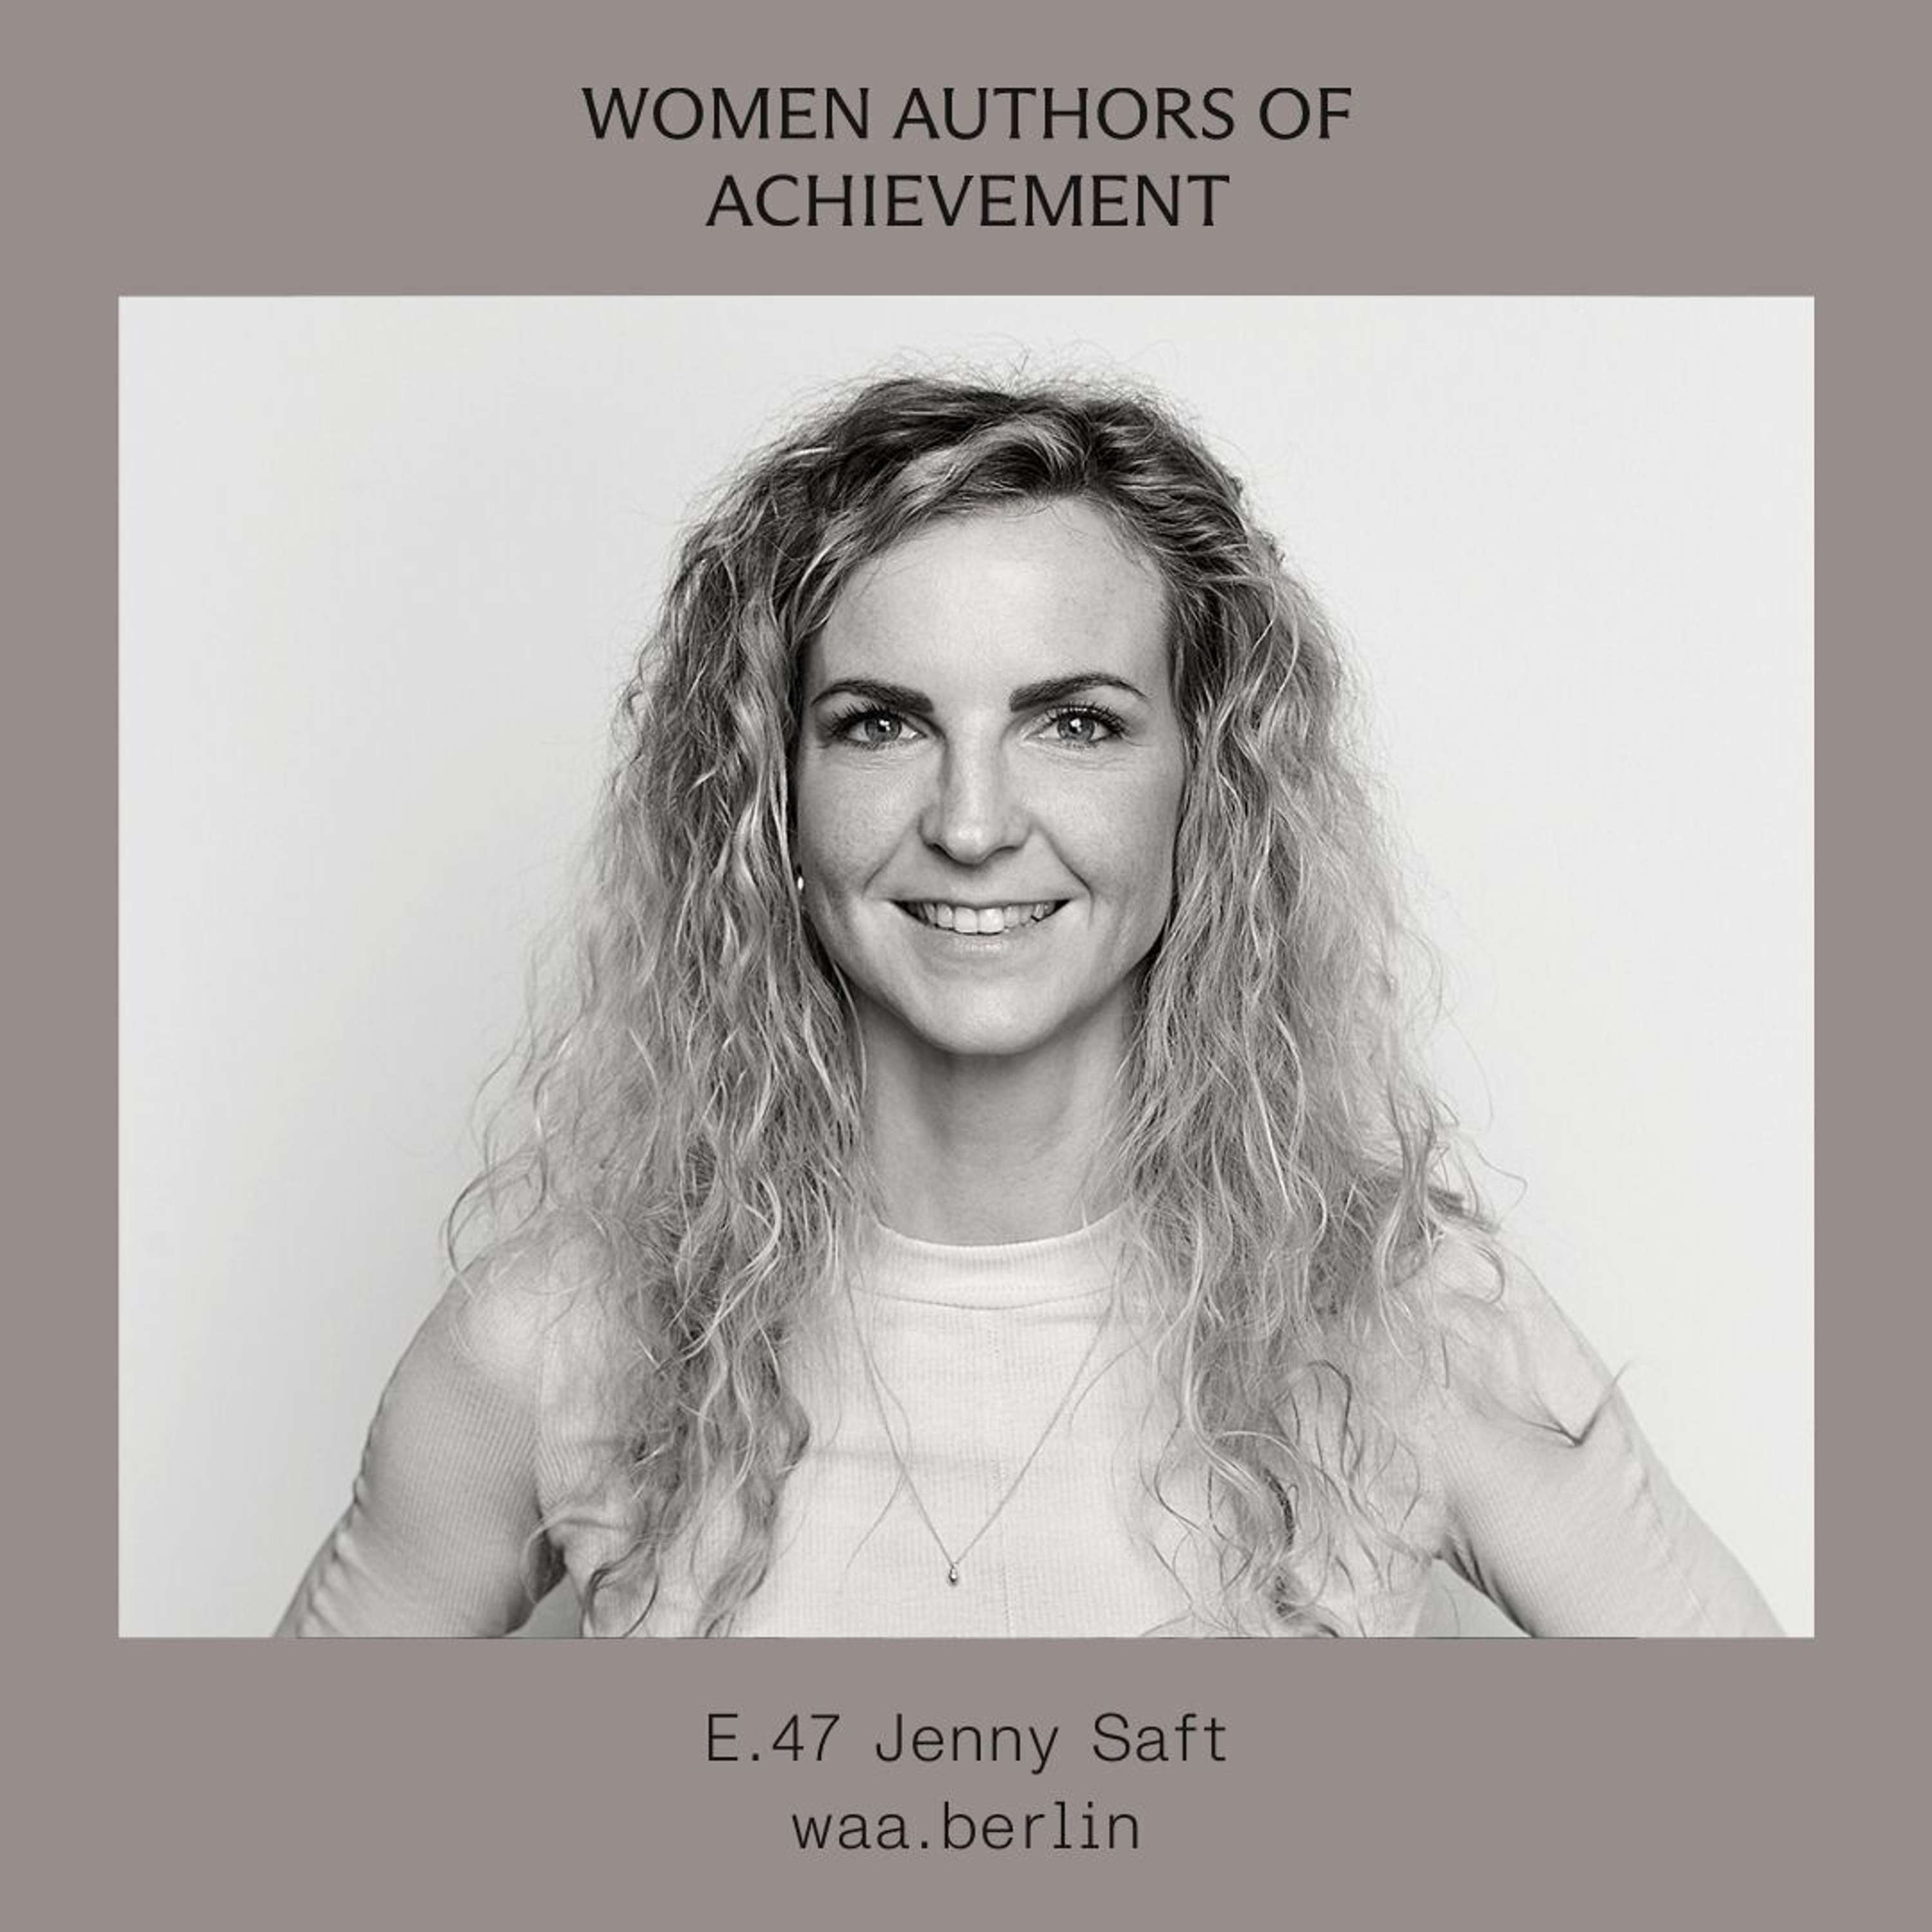 E.47 Attracting talent by offering inclusive fertility benefits with Jenny Saft